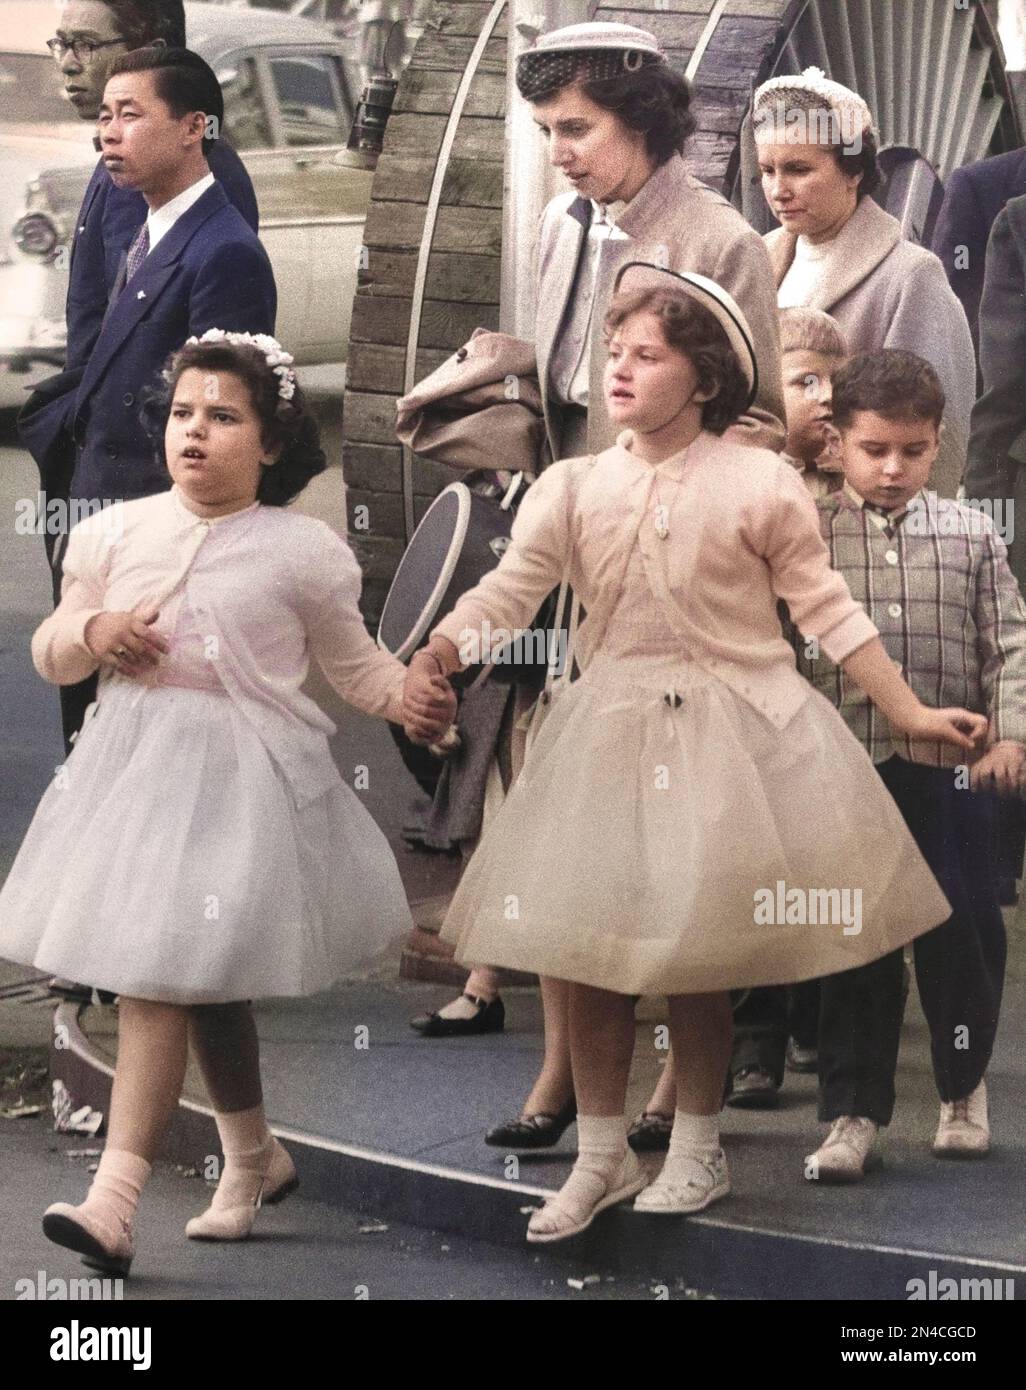 Two women, two young girls and two young boys in nice dress clothes about to cross street, New York City, New York, USA, Angelo Rizzuto, Anthony Angel Collection, May 1956 Stock Photo